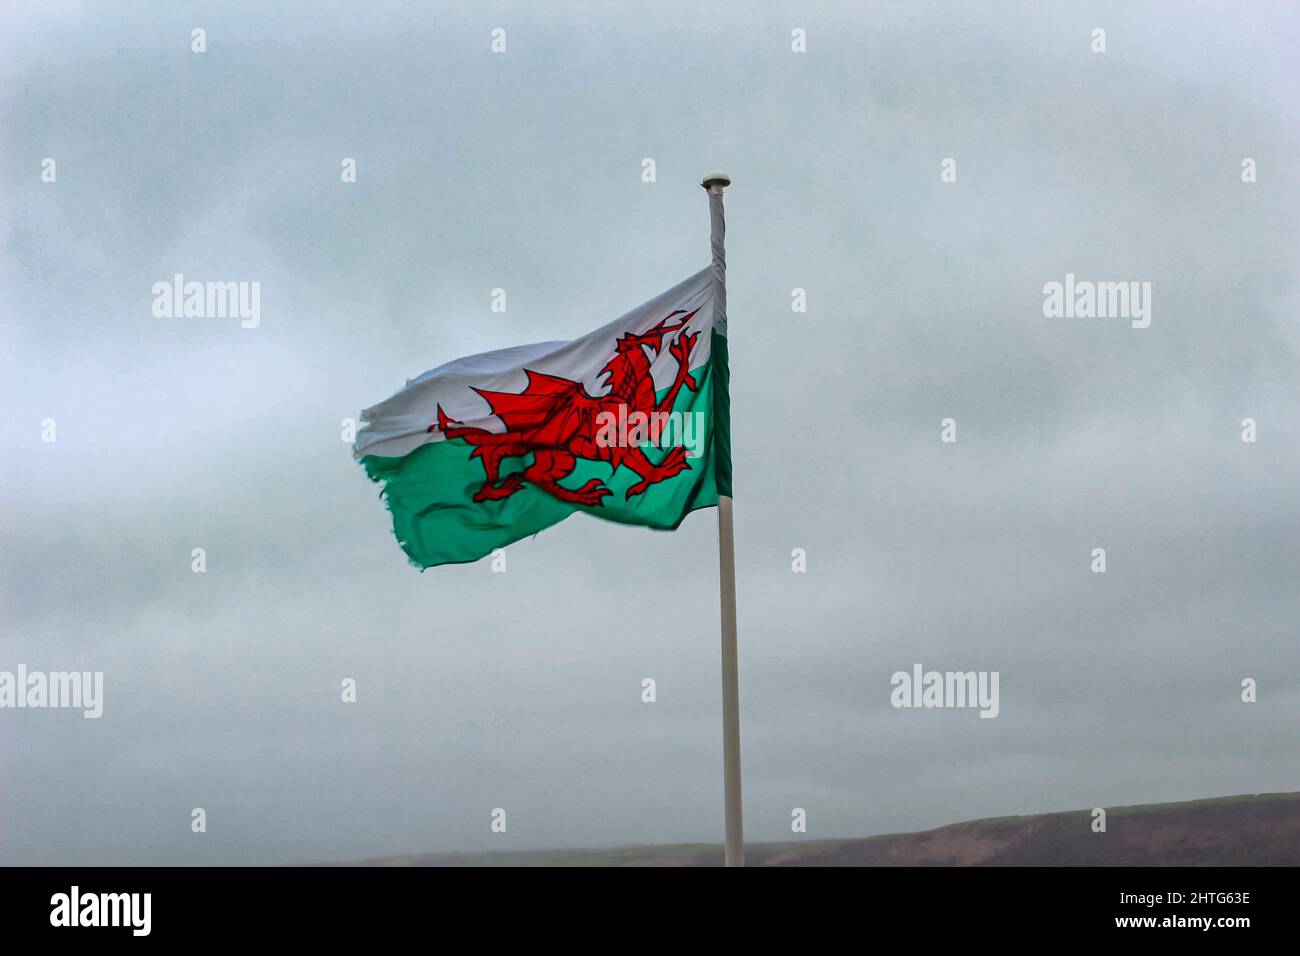 Dark image of the Welsh flag on a pole on a cloudy day in New Quay, Wales Stock Photo